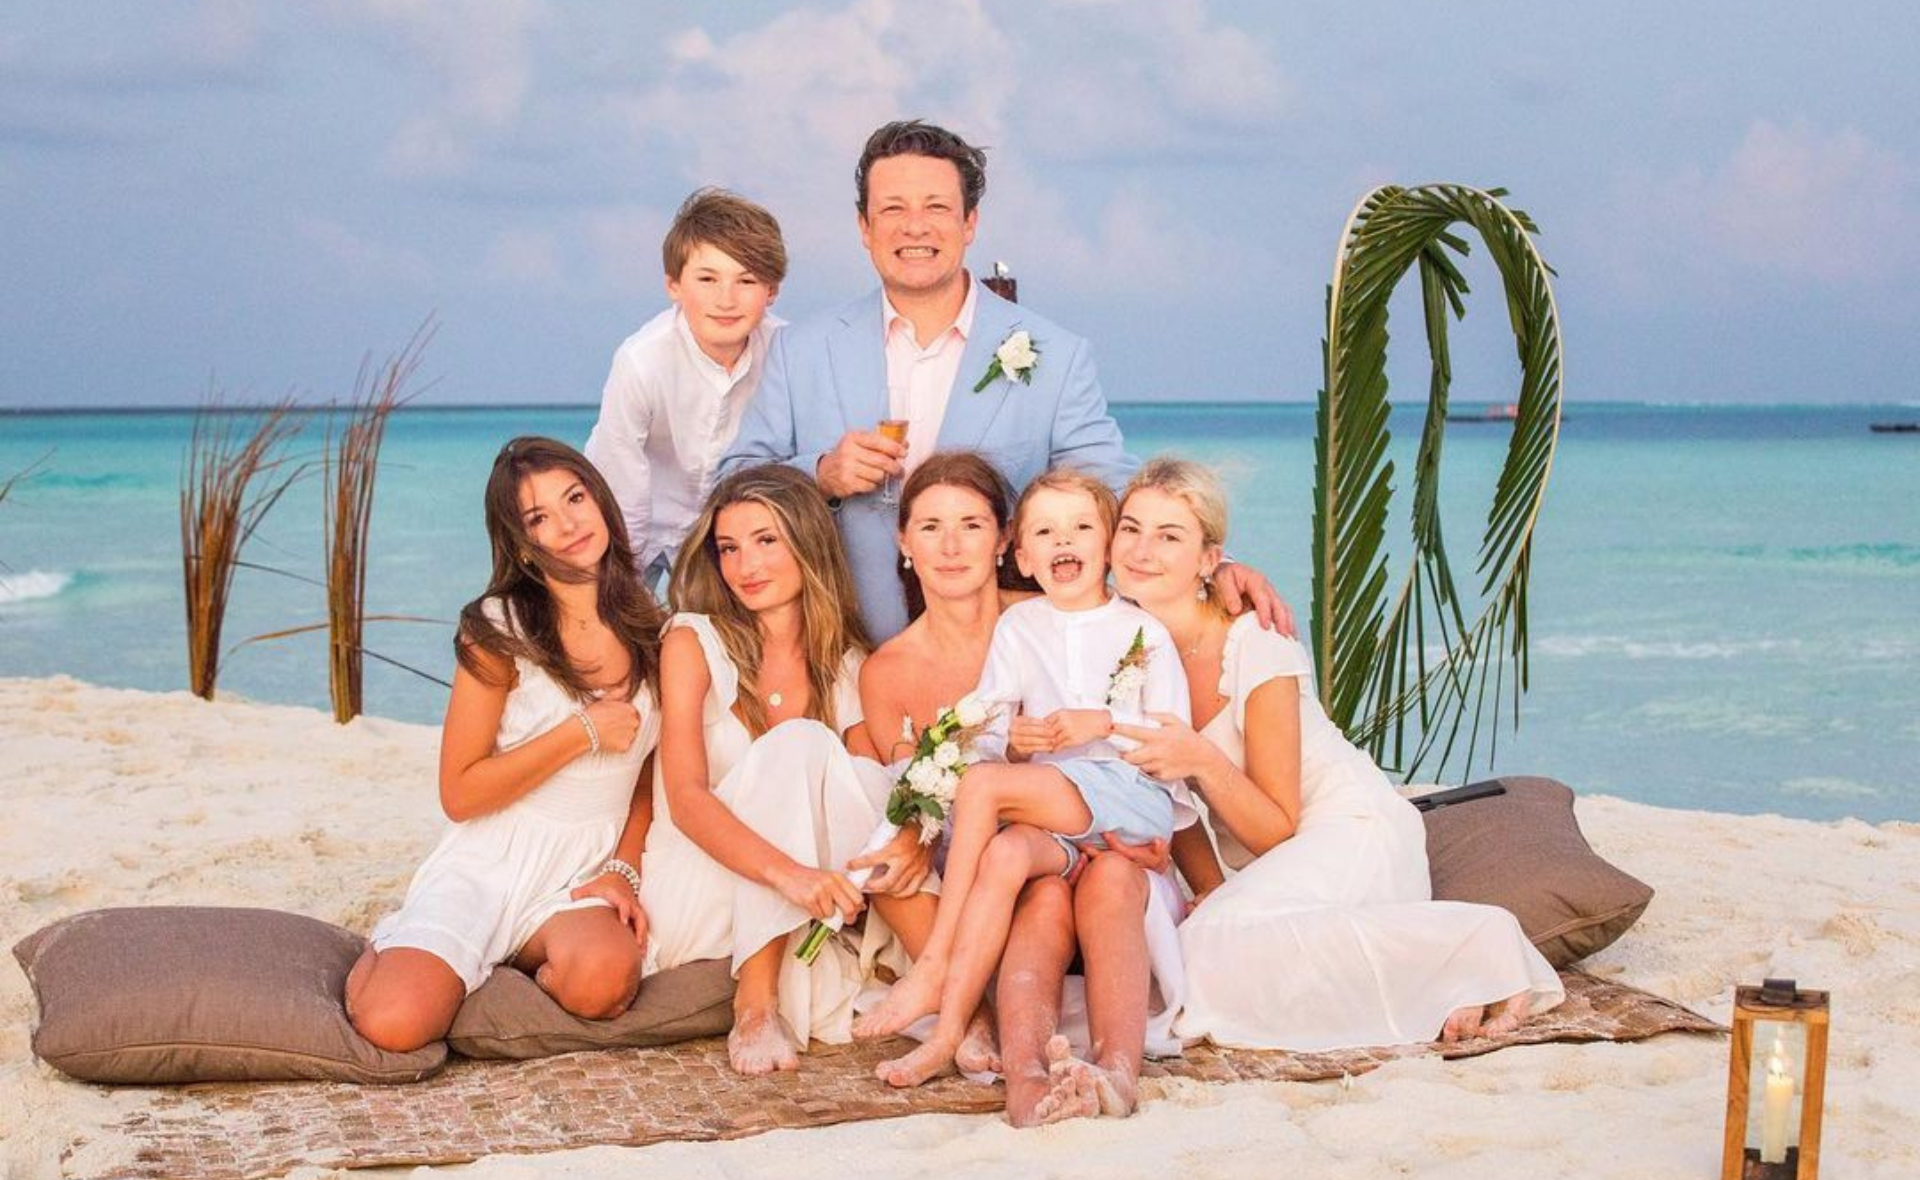 Meet Jamie Olivers’ gorgeous family of seven